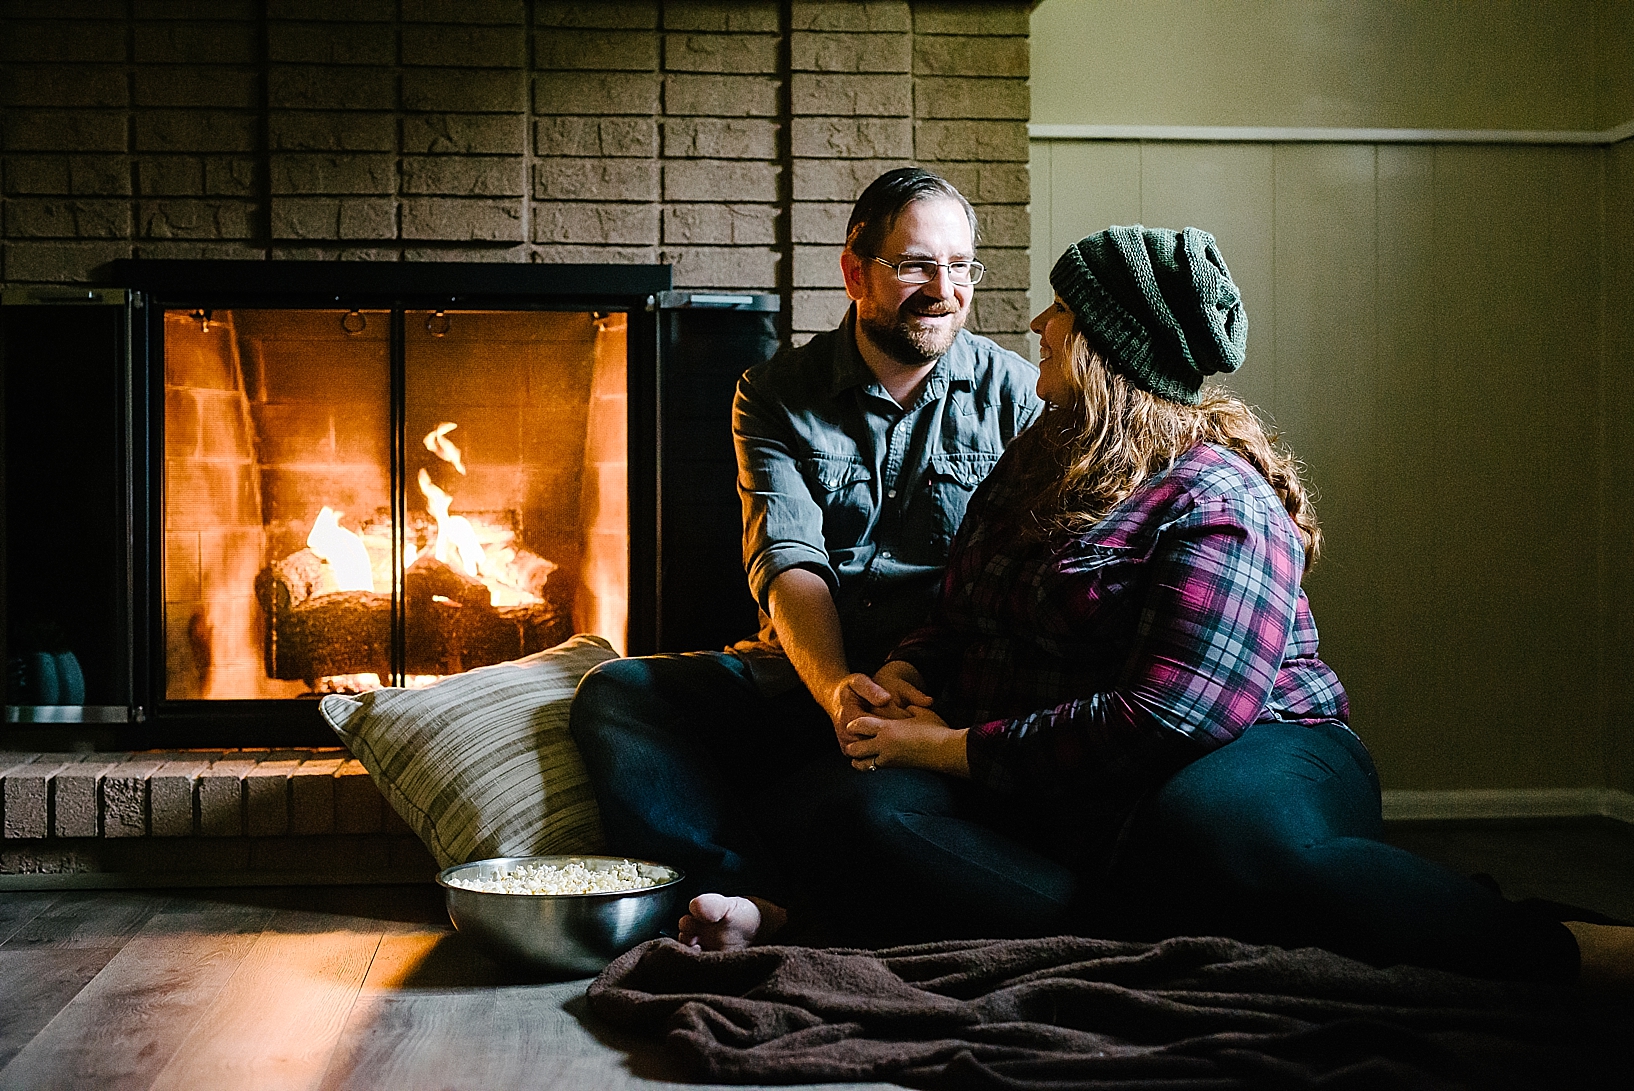 man and woman sitting on floor by fireplace with bowl of popcorn